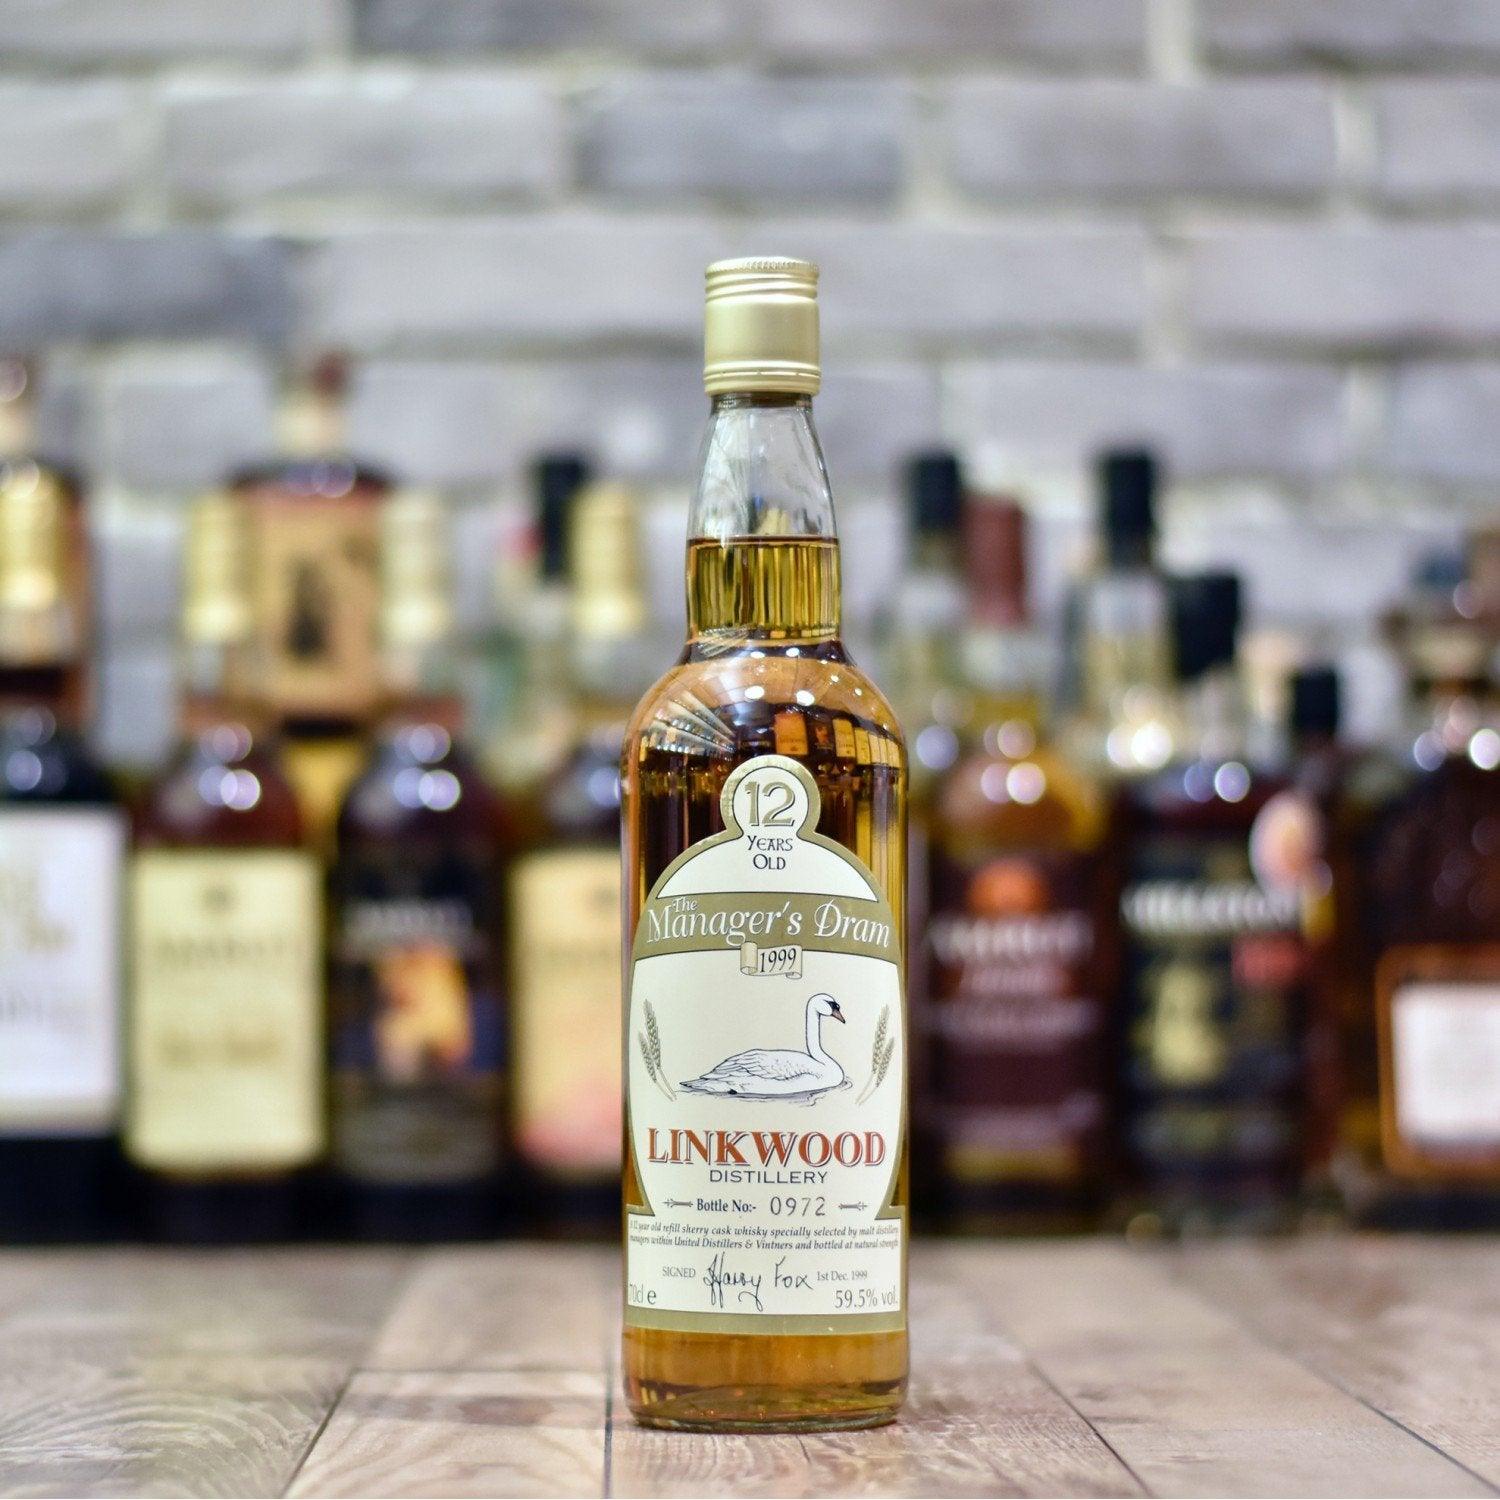 Manager's Dram - Linkwood 12 Year Old - The Rare Malt